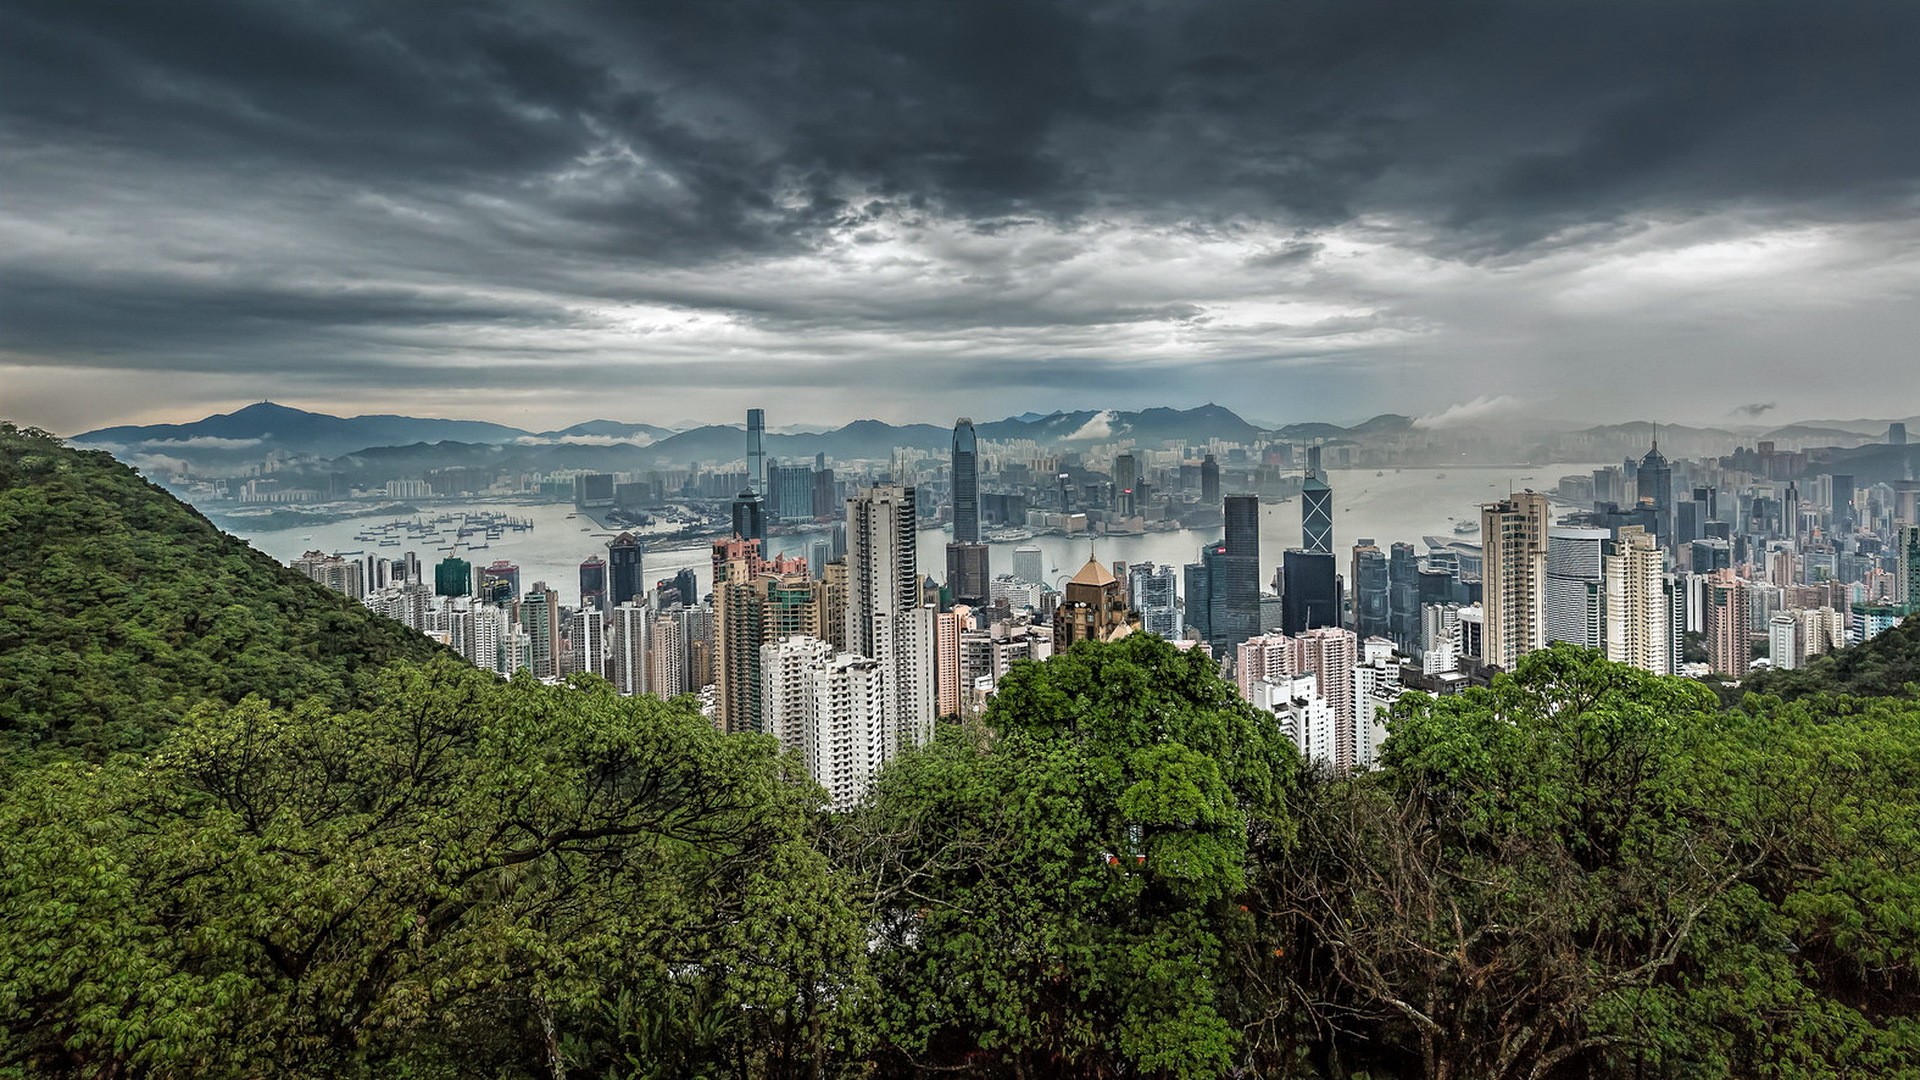 General 1920x1080 Hong Kong cityscape clouds HDR building trees China Asia